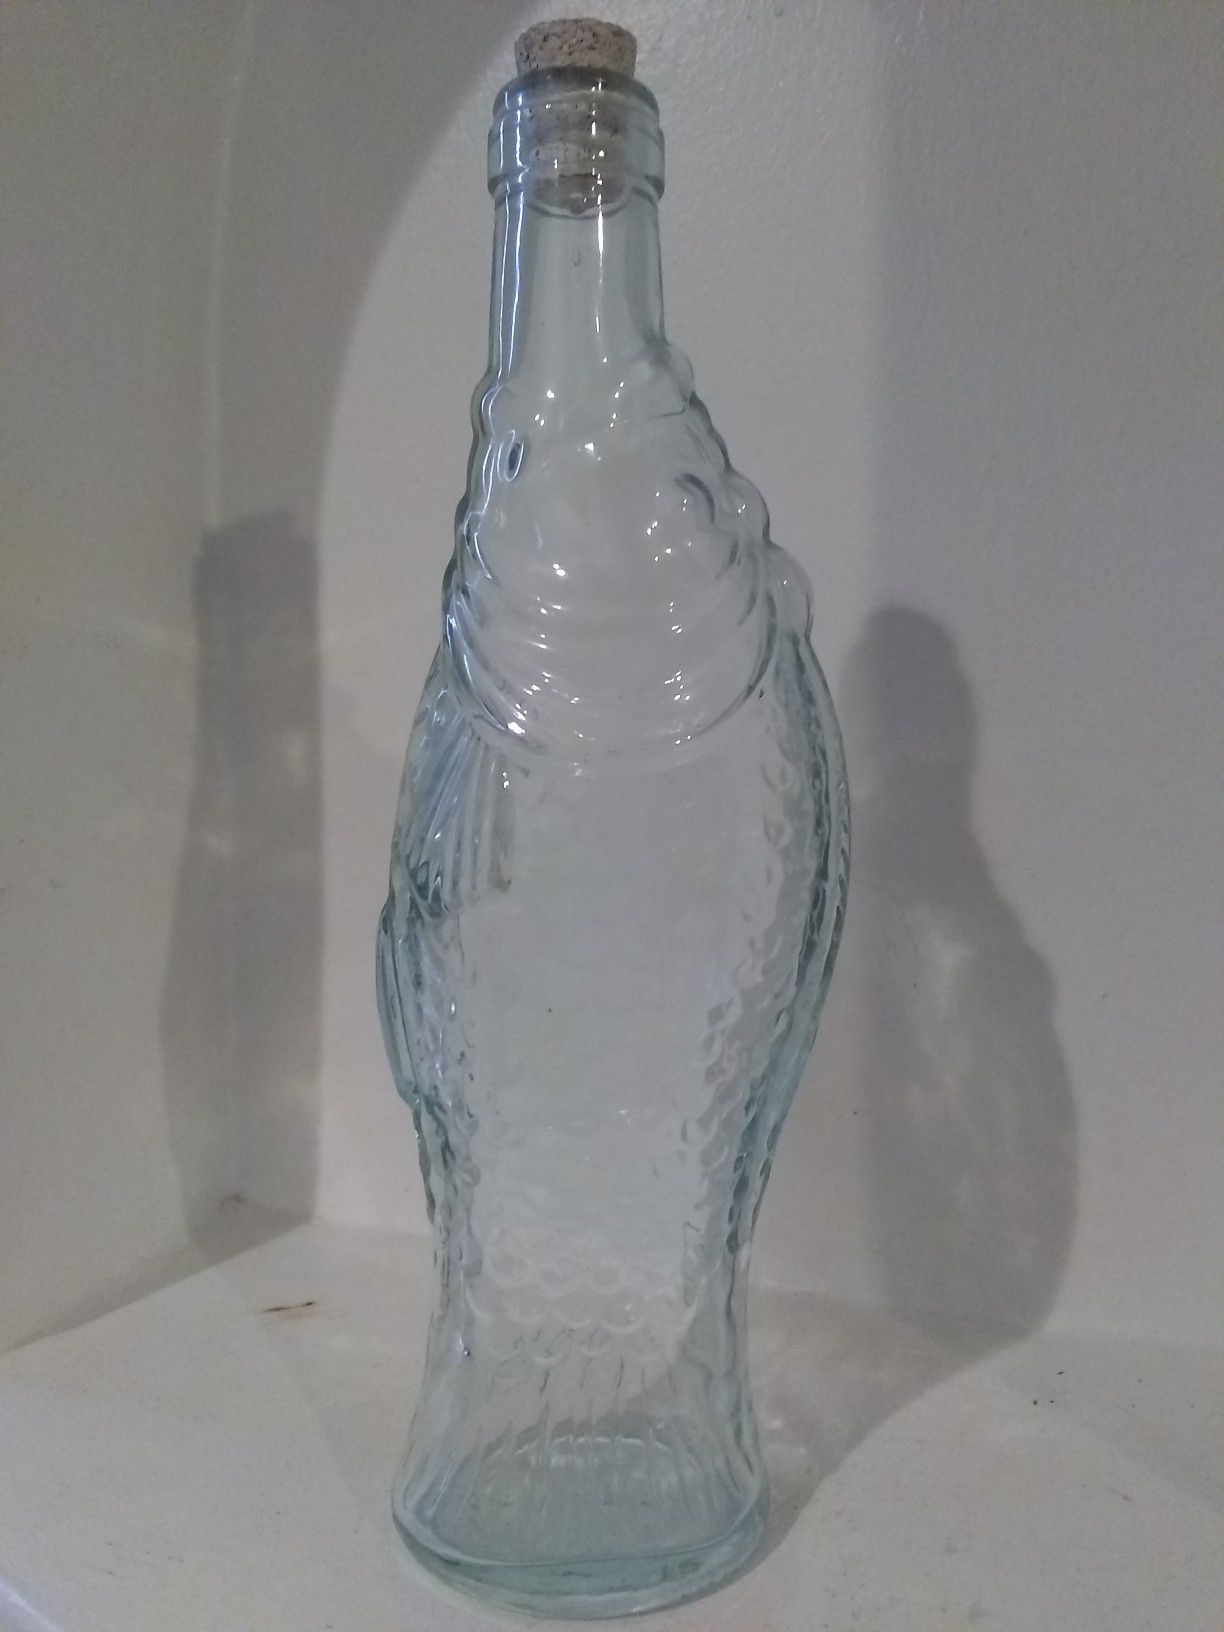 Pescevino Fish Wine Bottle Clear Glass Italy Vintage 1989 Imported 750 ml